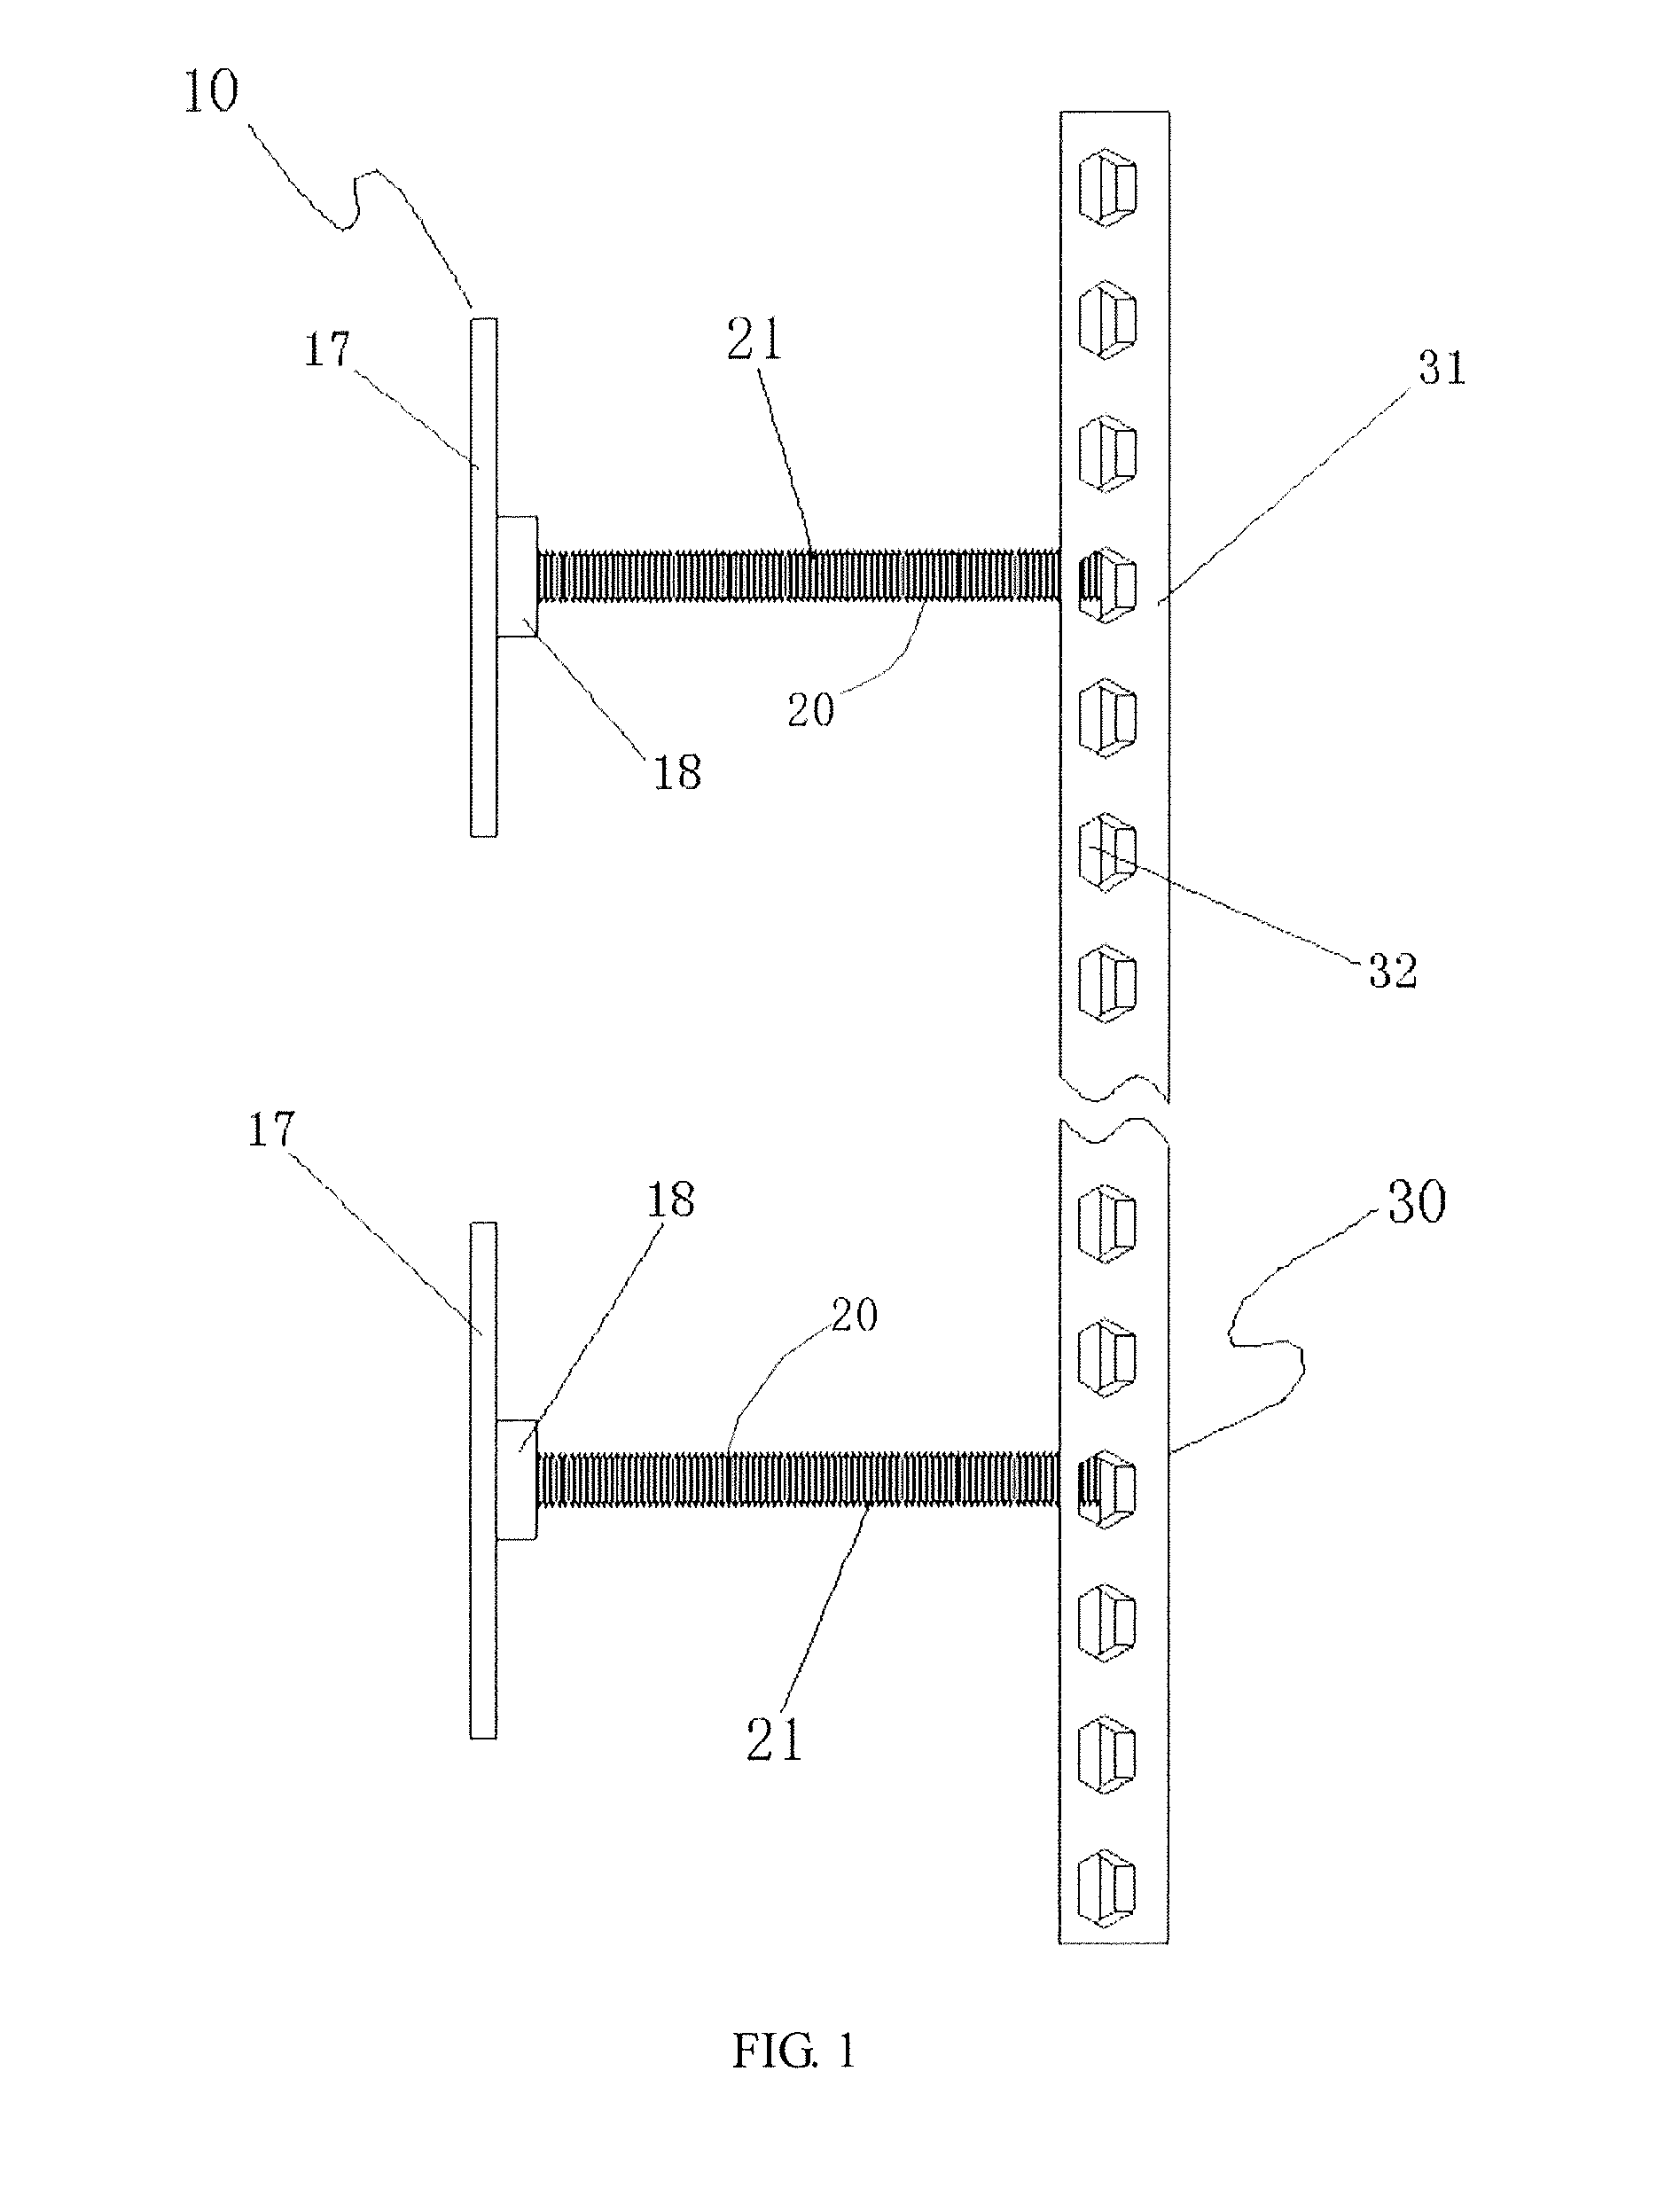 Method for plastering construction in architectural decoration